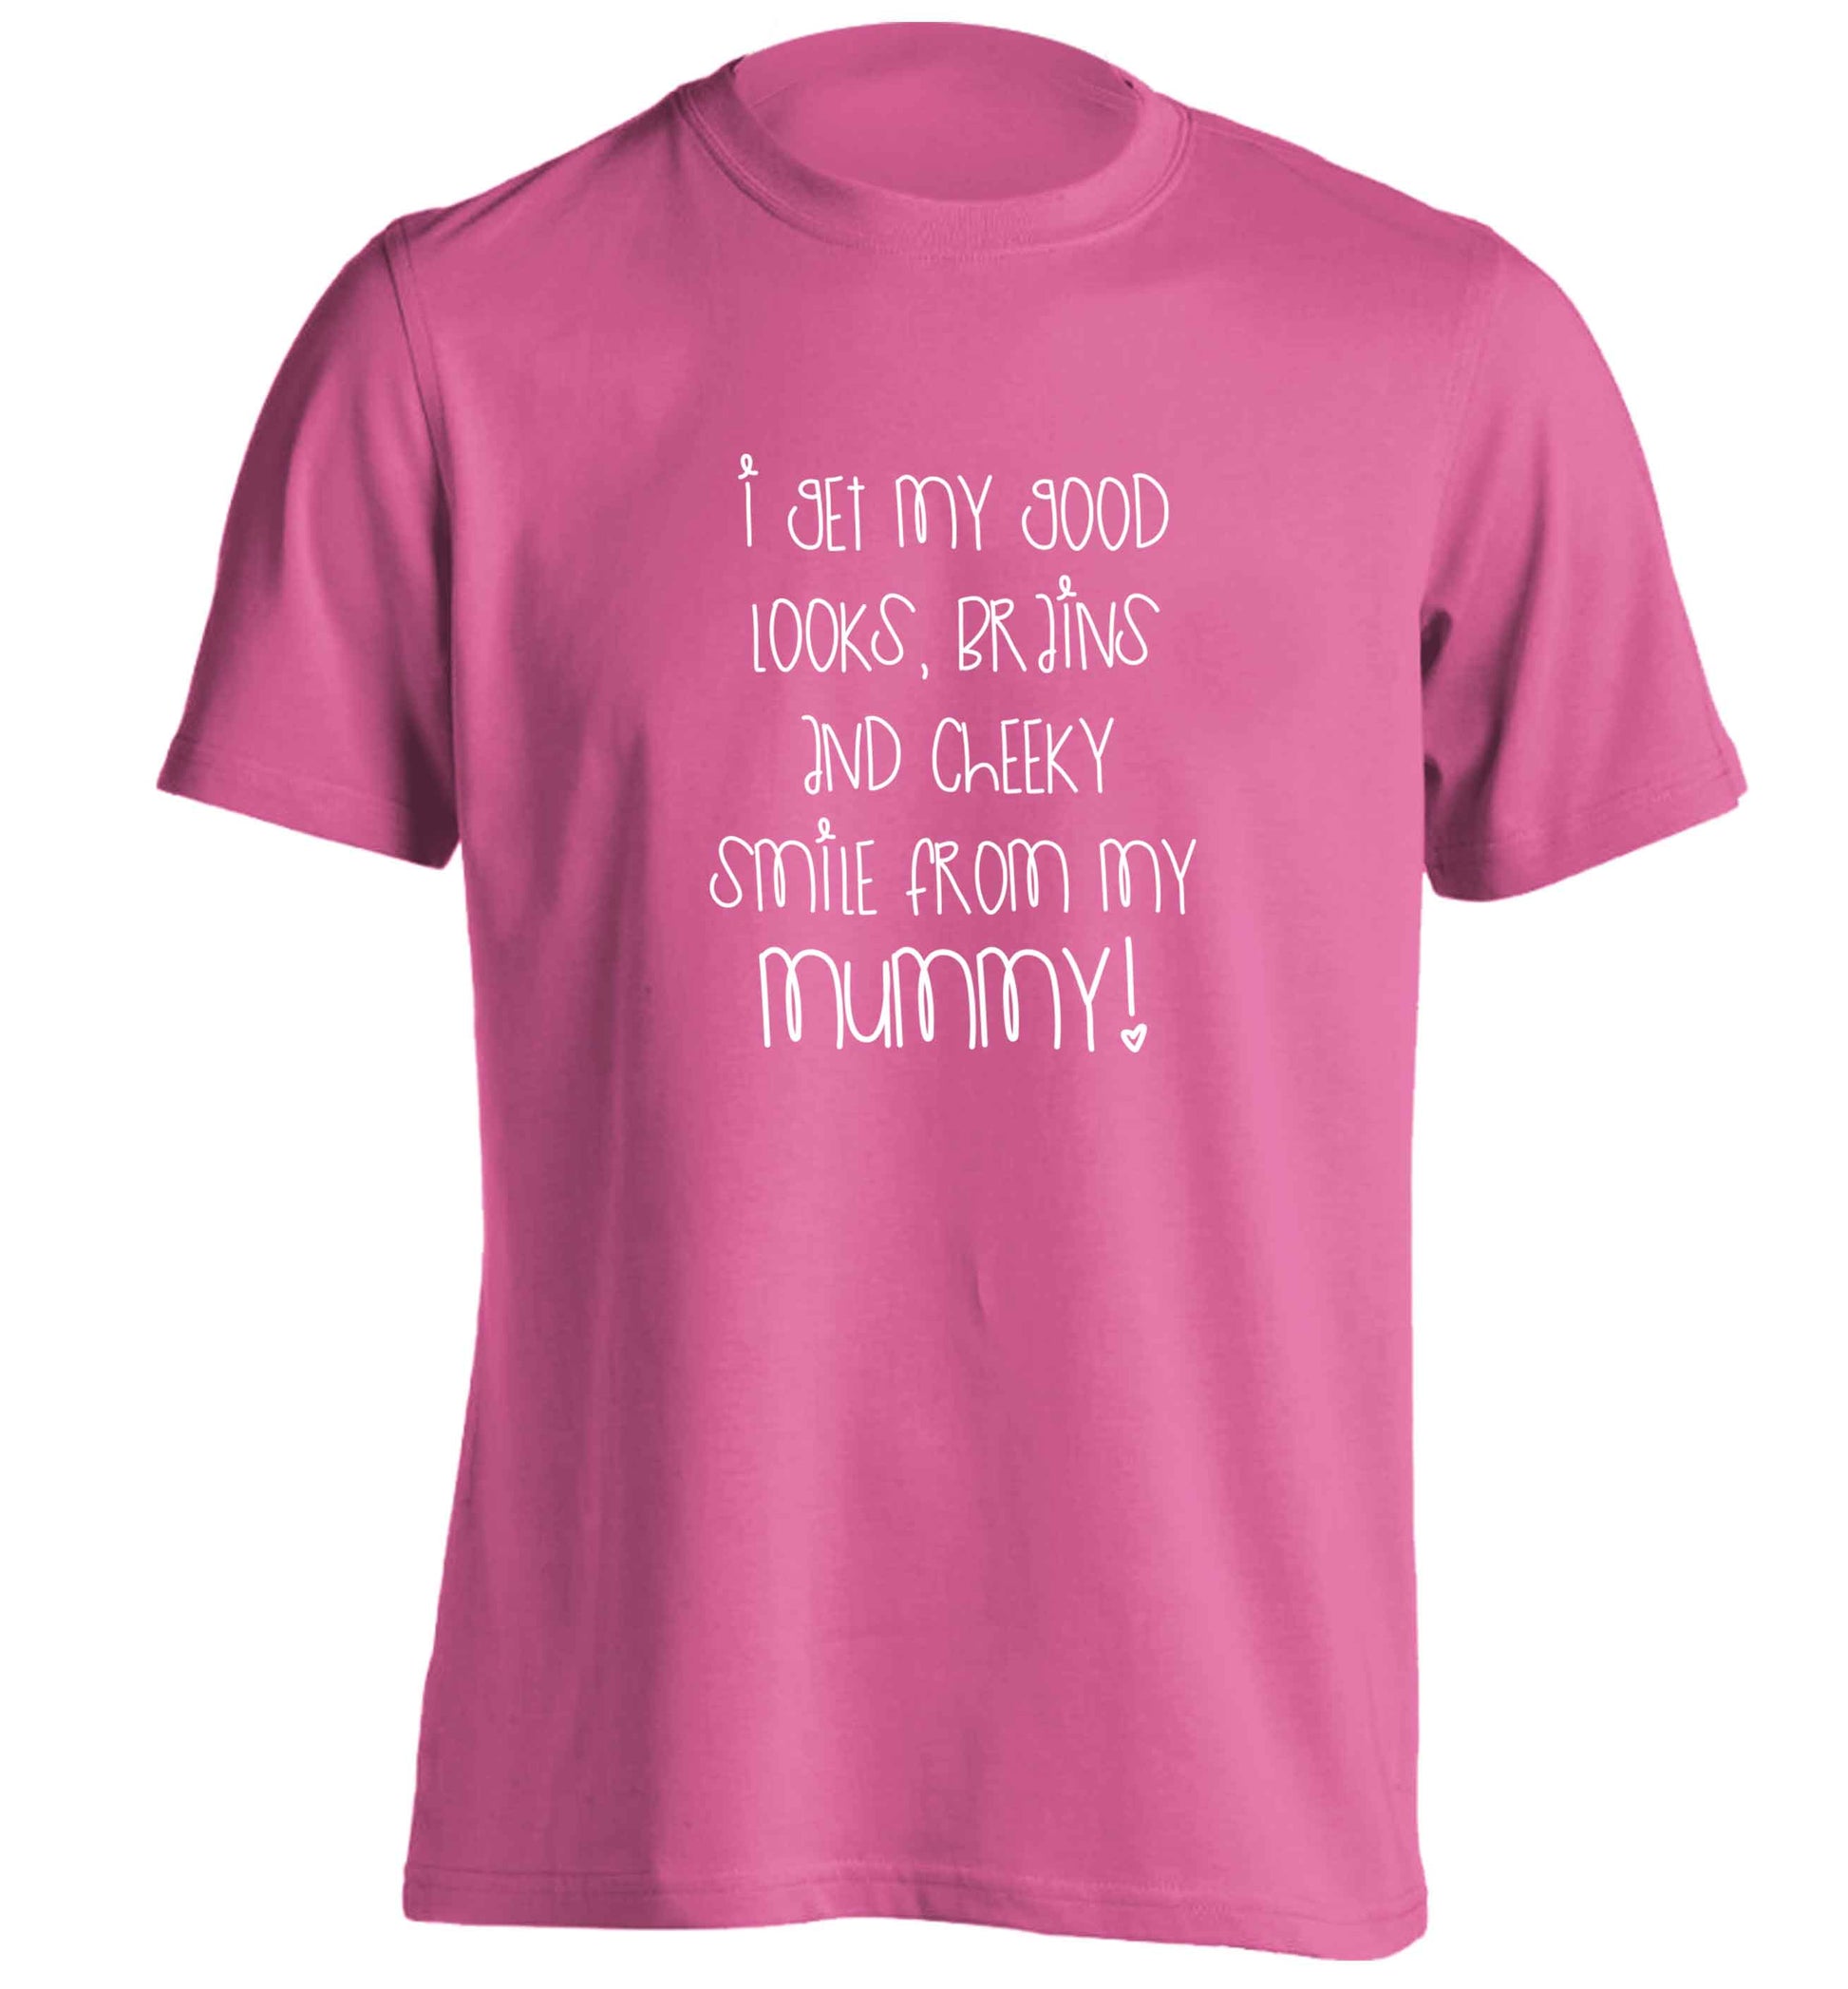 I get my good looks, brains and cheeky smile from my mummy adults unisex pink Tshirt 2XL